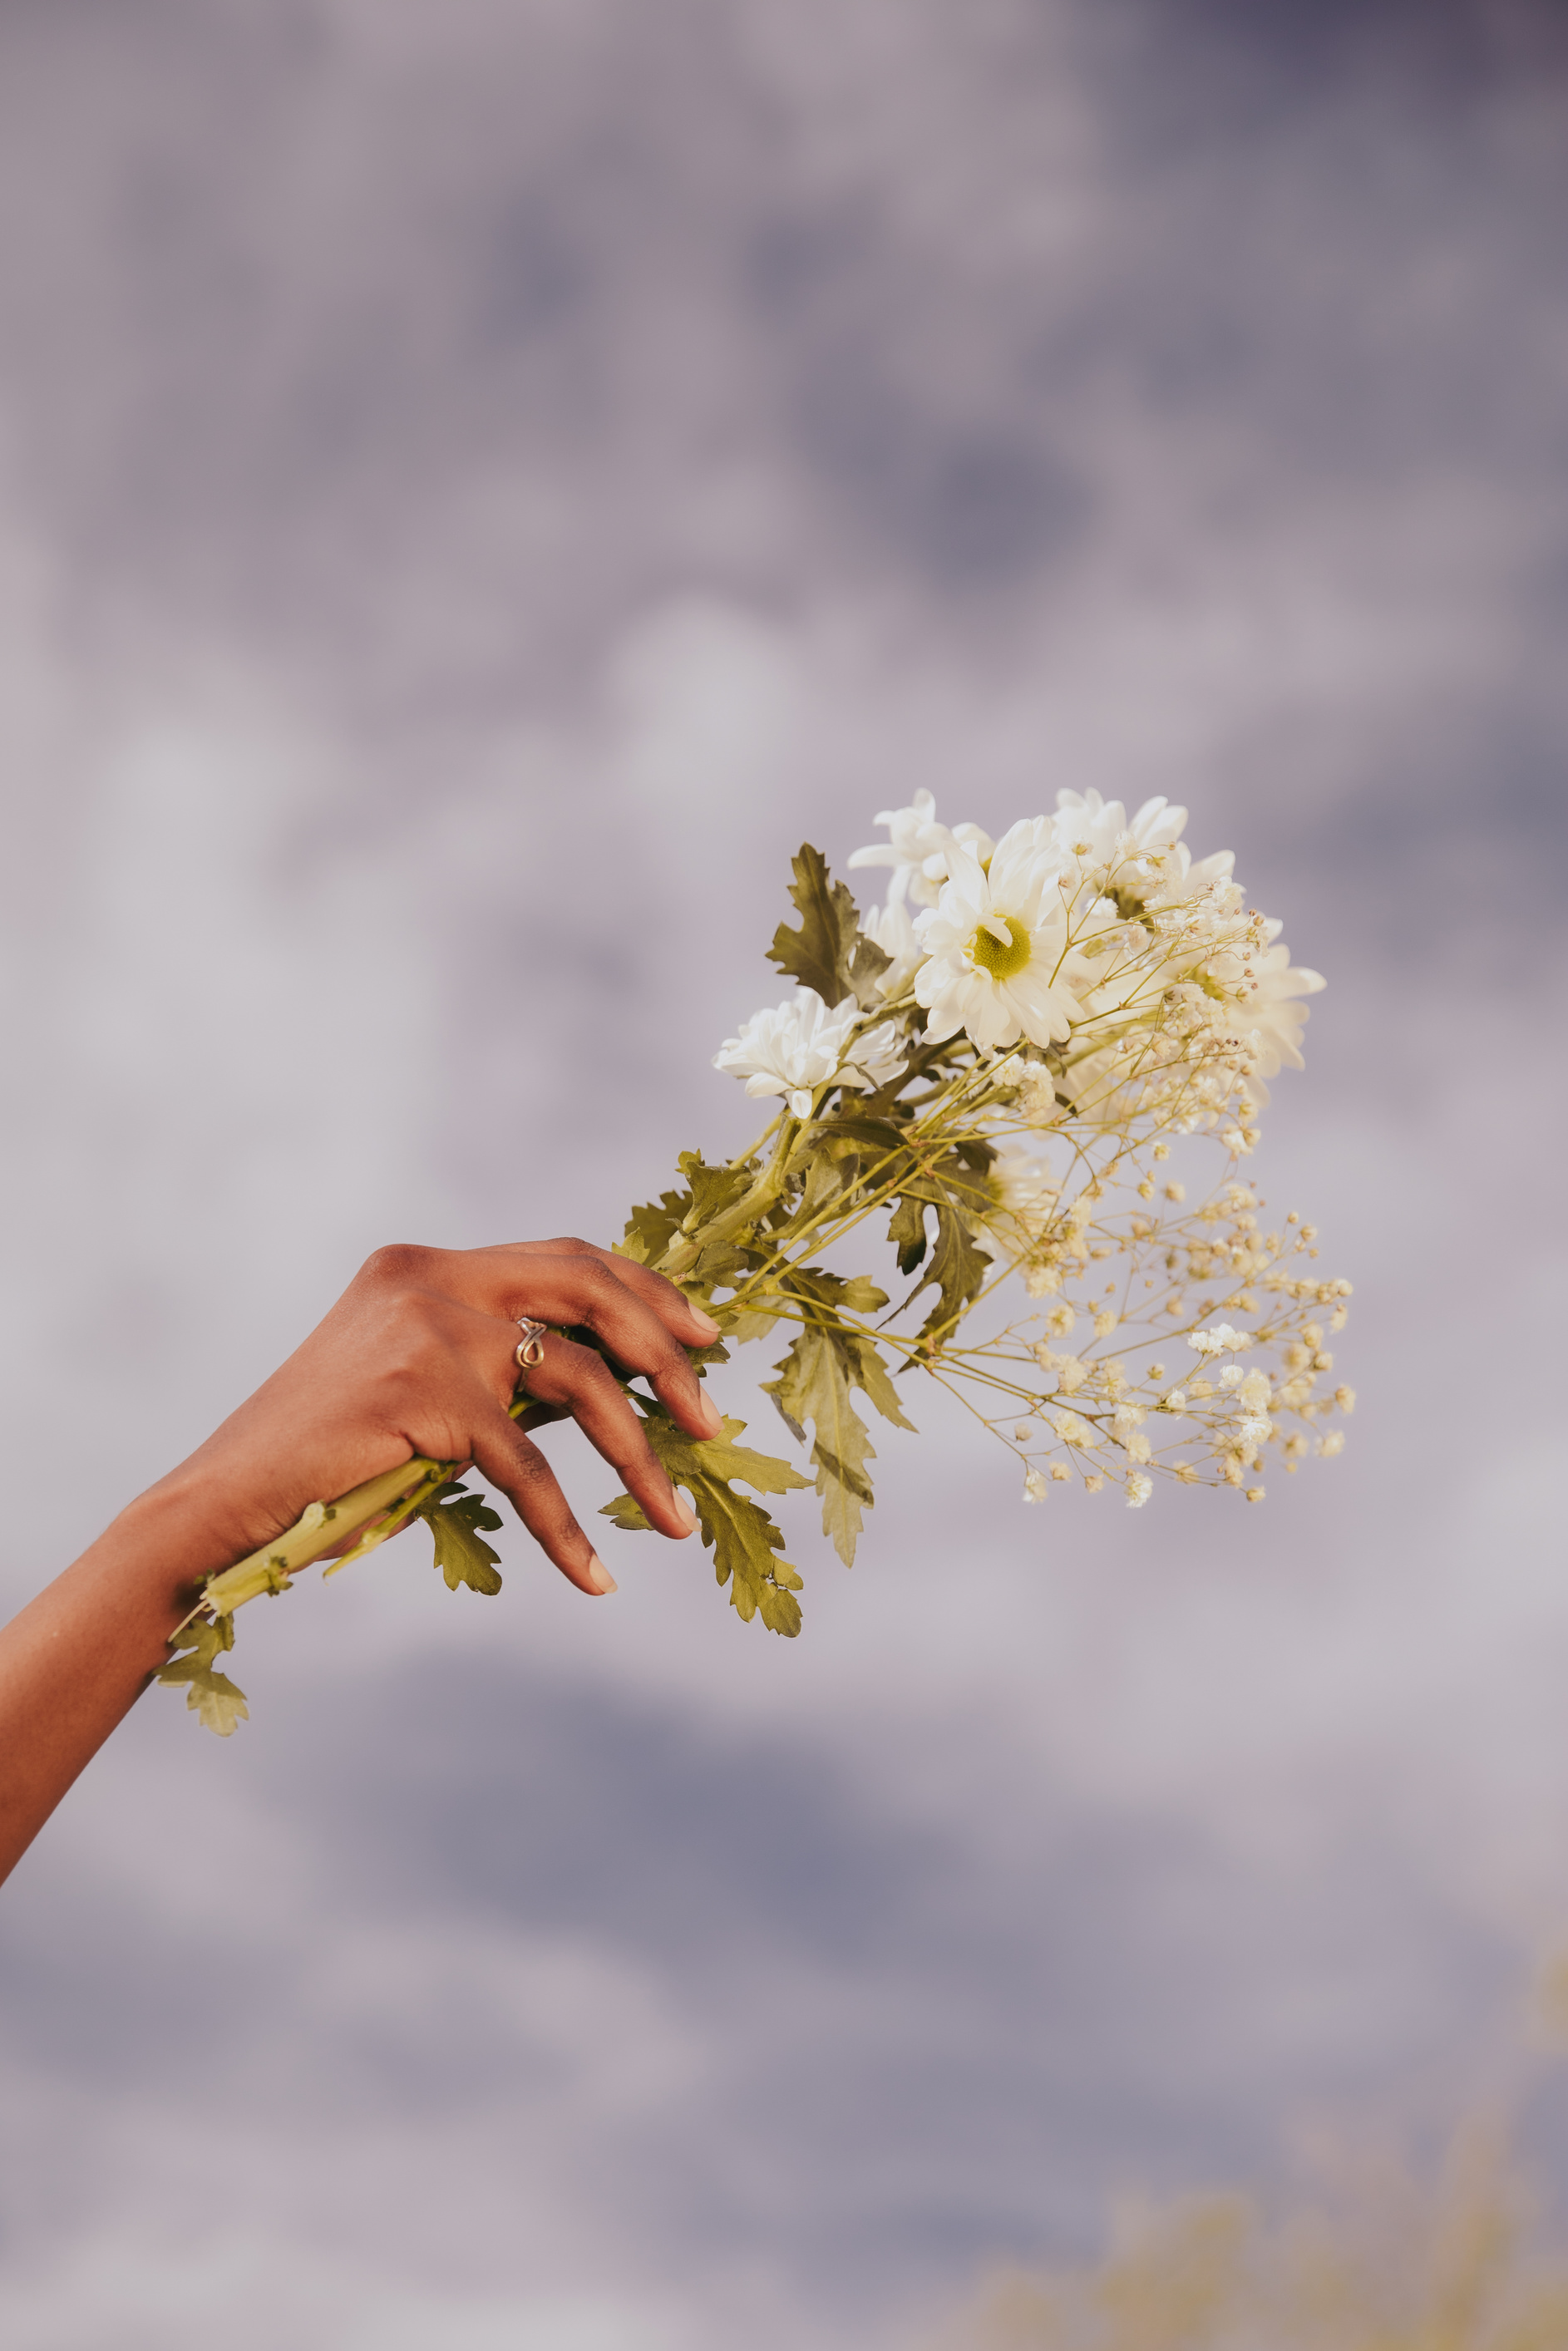 Female Hand Holding a Bunch of White Flowers